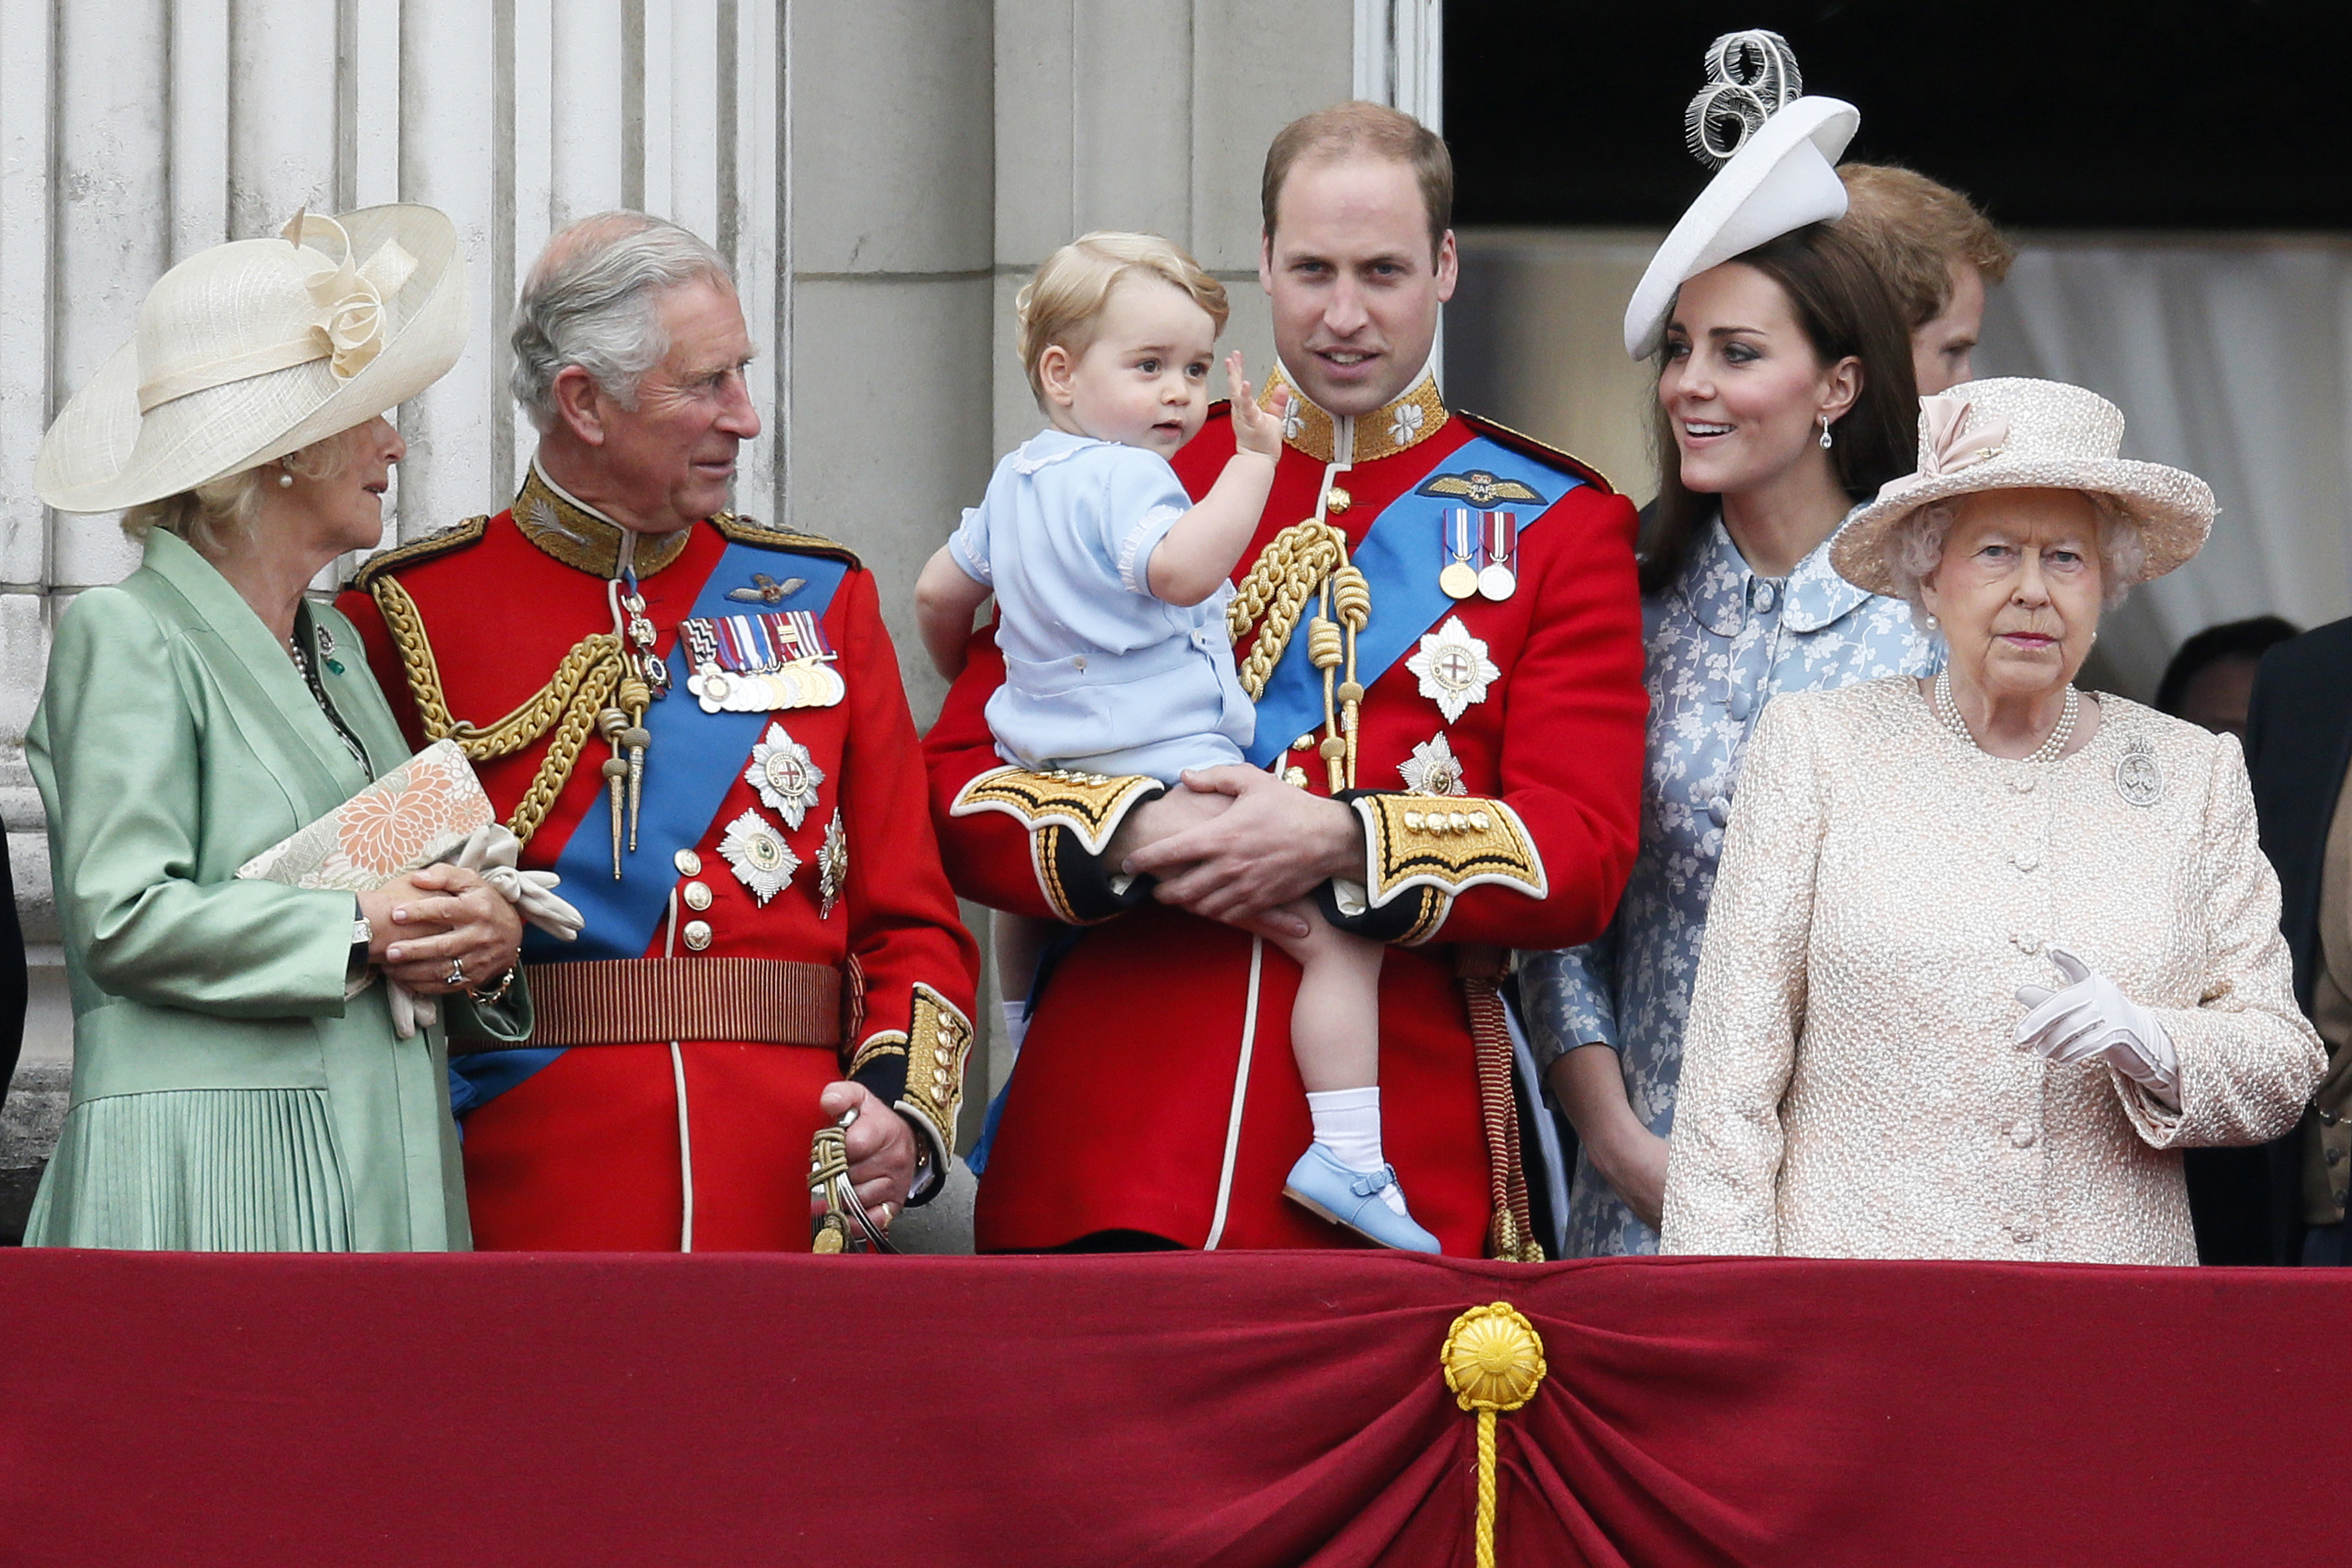 Britain's Camilla the Duchess of Cornwall, Prince Charles, Prince Willian holding Prince George, Catherine, the Duchess of Cambridge and Queen Elizabeth stand on the balcony at Buckingham Palace after attending the Trooping the Colour ceremony in London, June 13, 2015. (Stefan Wermuth—Reuters)